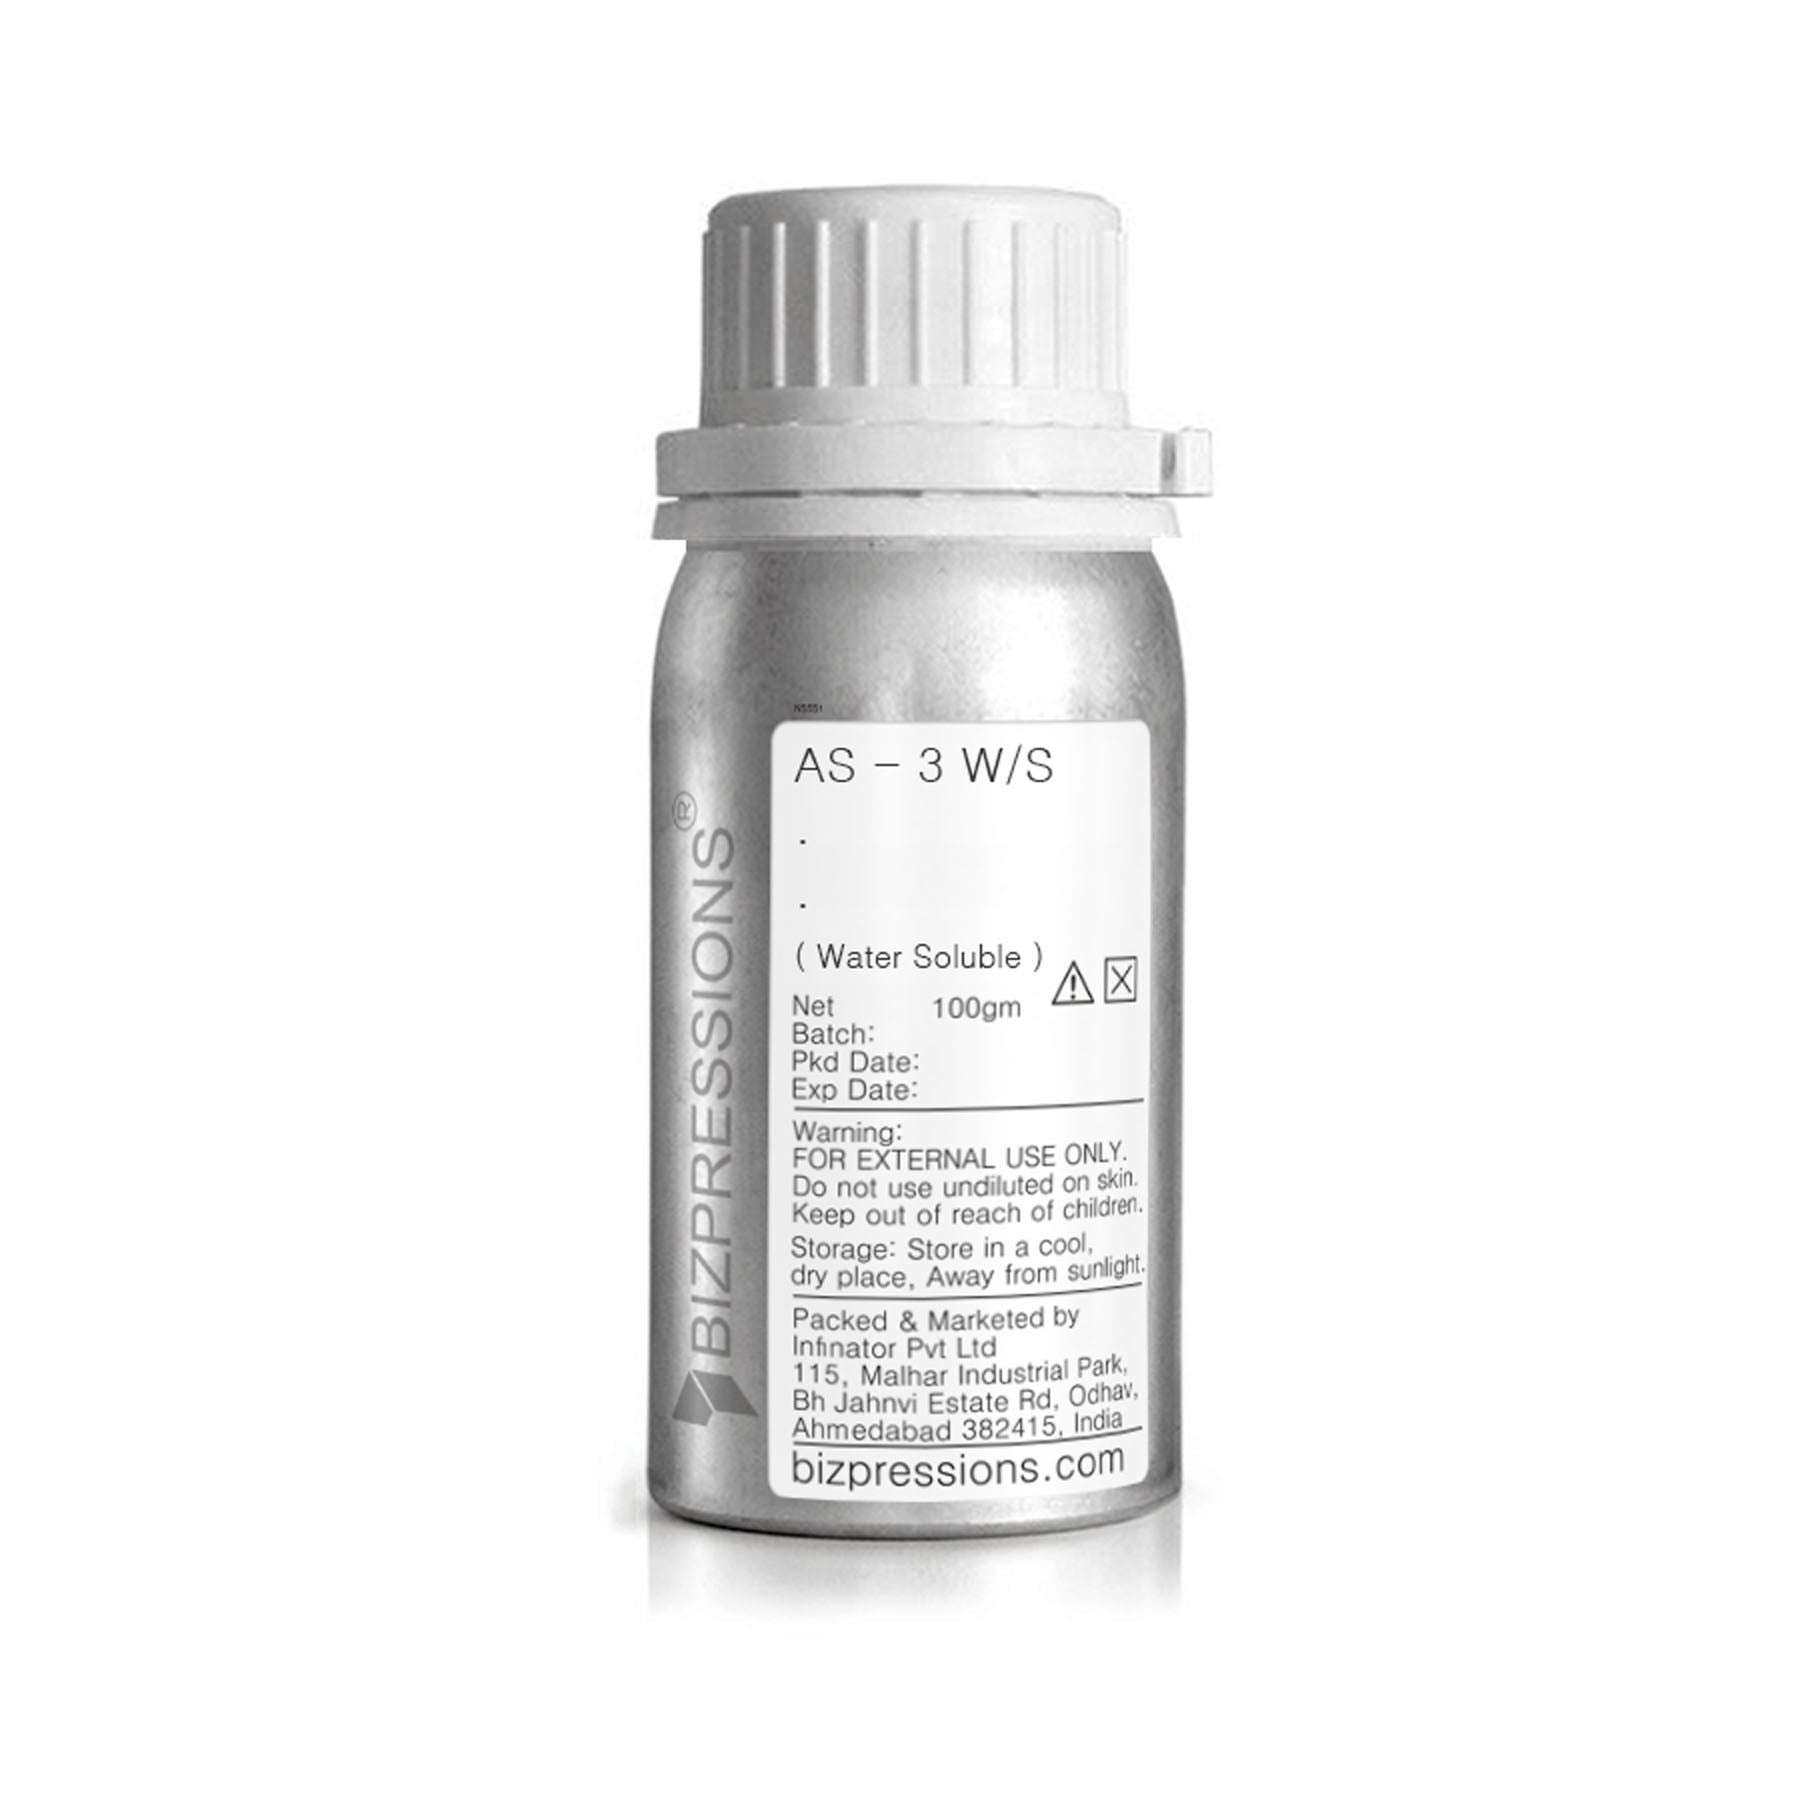 AS - 3 W/S - Fragrance ( Water Soluble ) - 100 gm